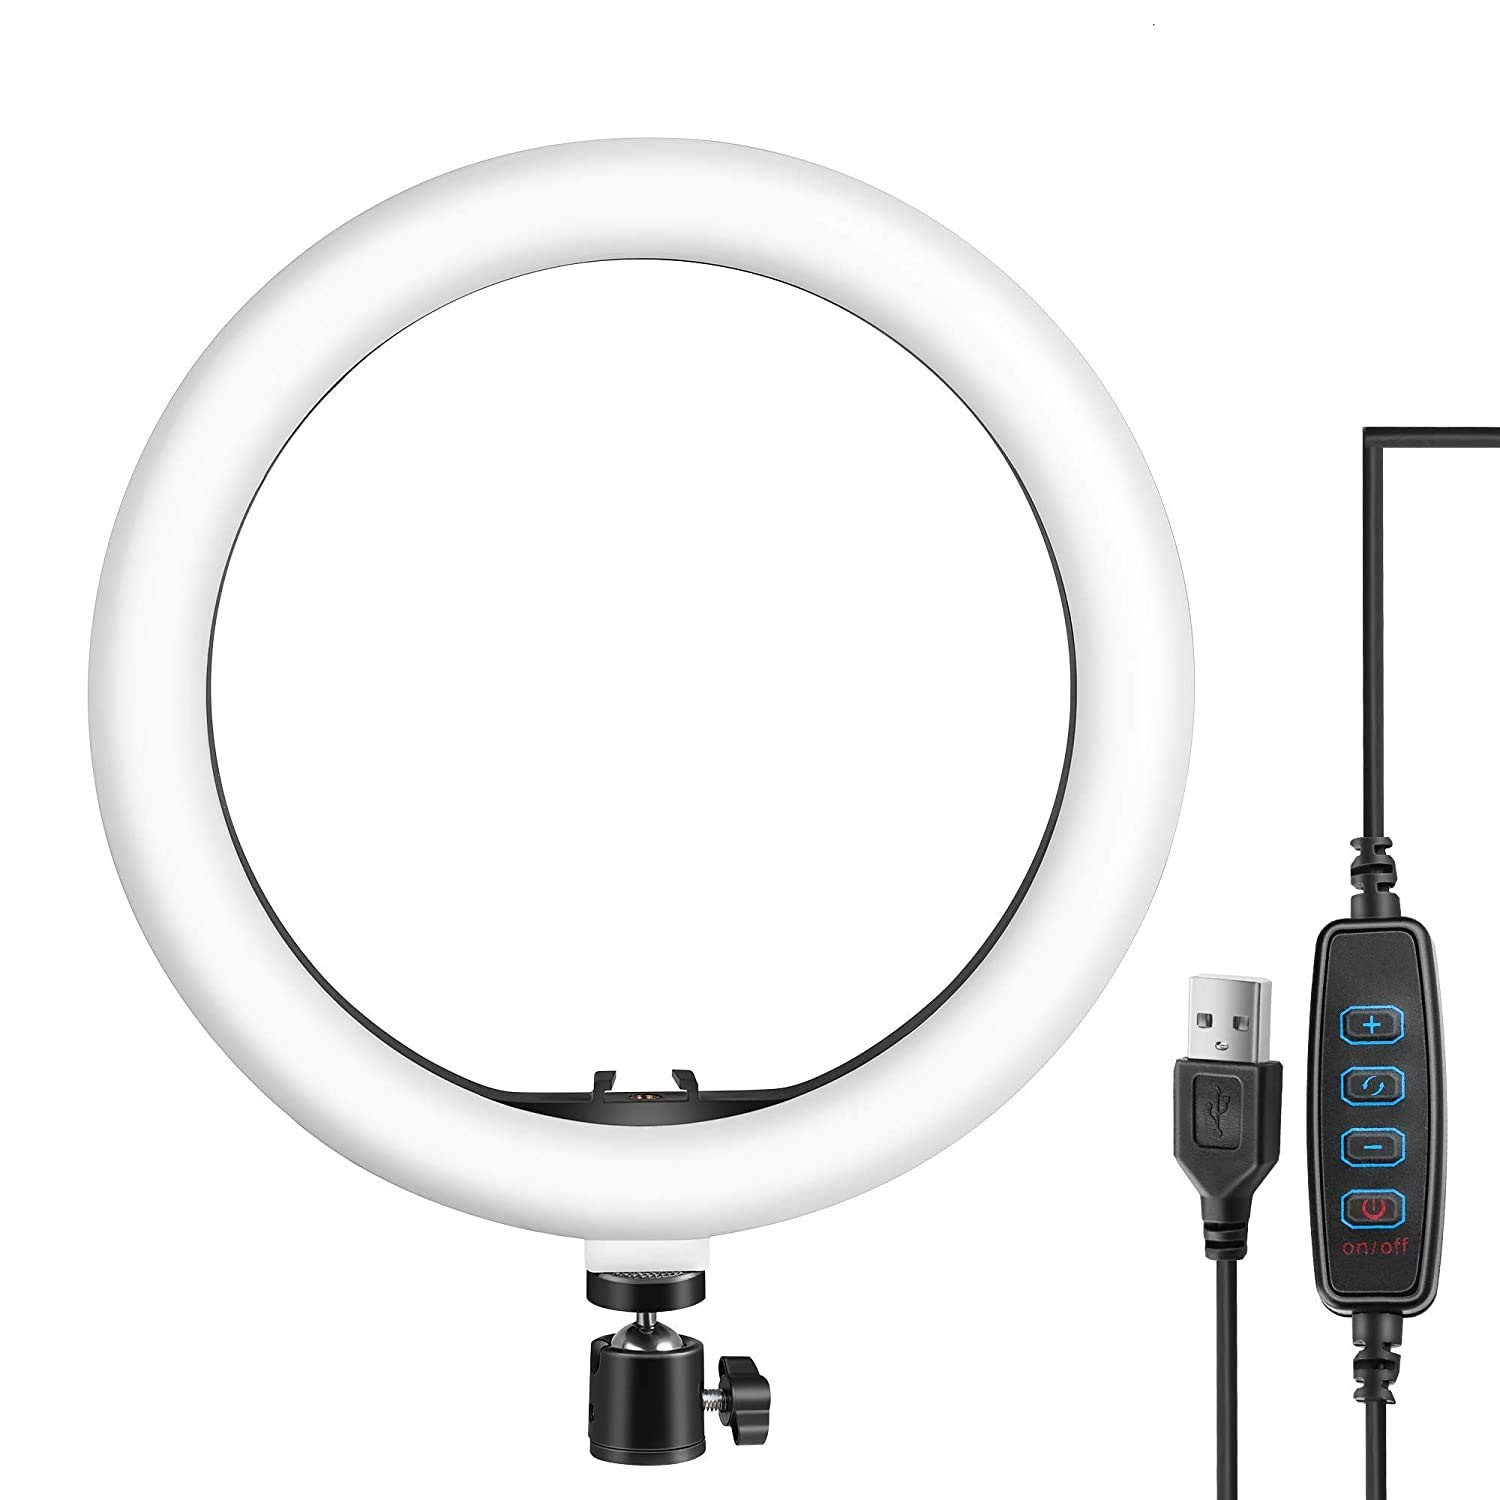 Three ways to use a ring light in photography - Photofocus